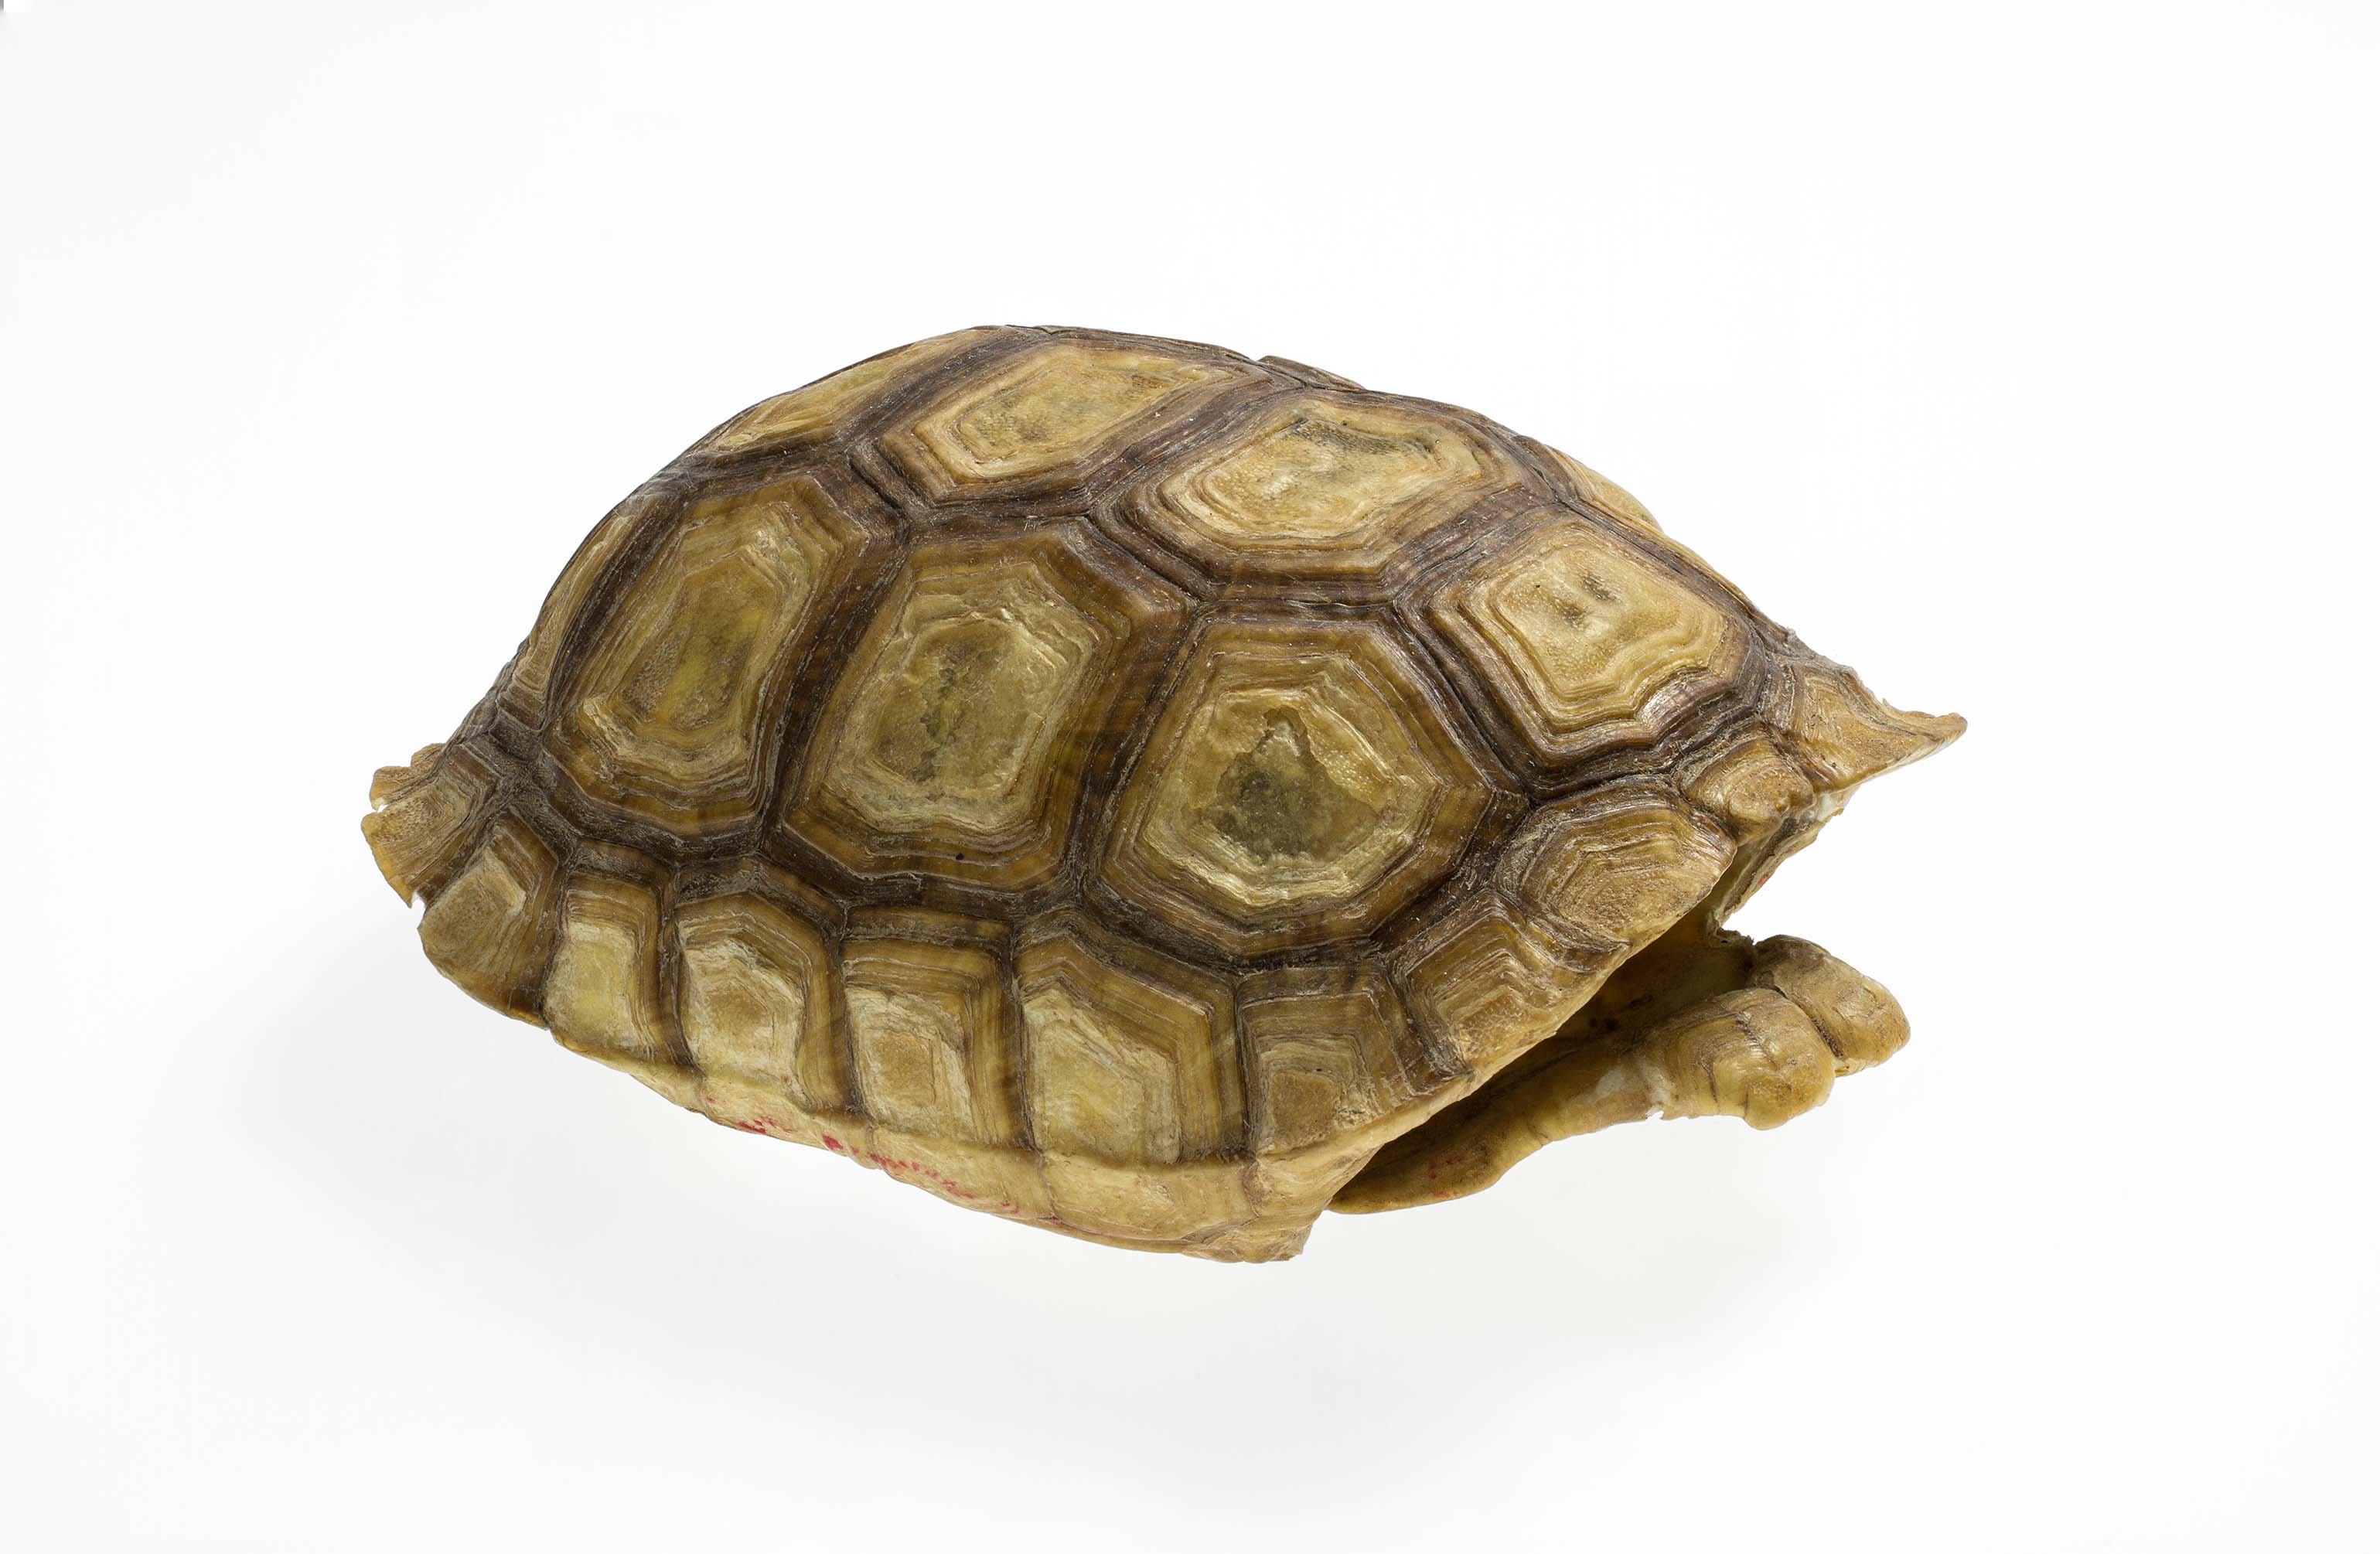 https://www.nps.gov/features/lake/museum/artifacts-fauna/TDT-images/tortoise_shell_3854_06ES_TDT.jpg